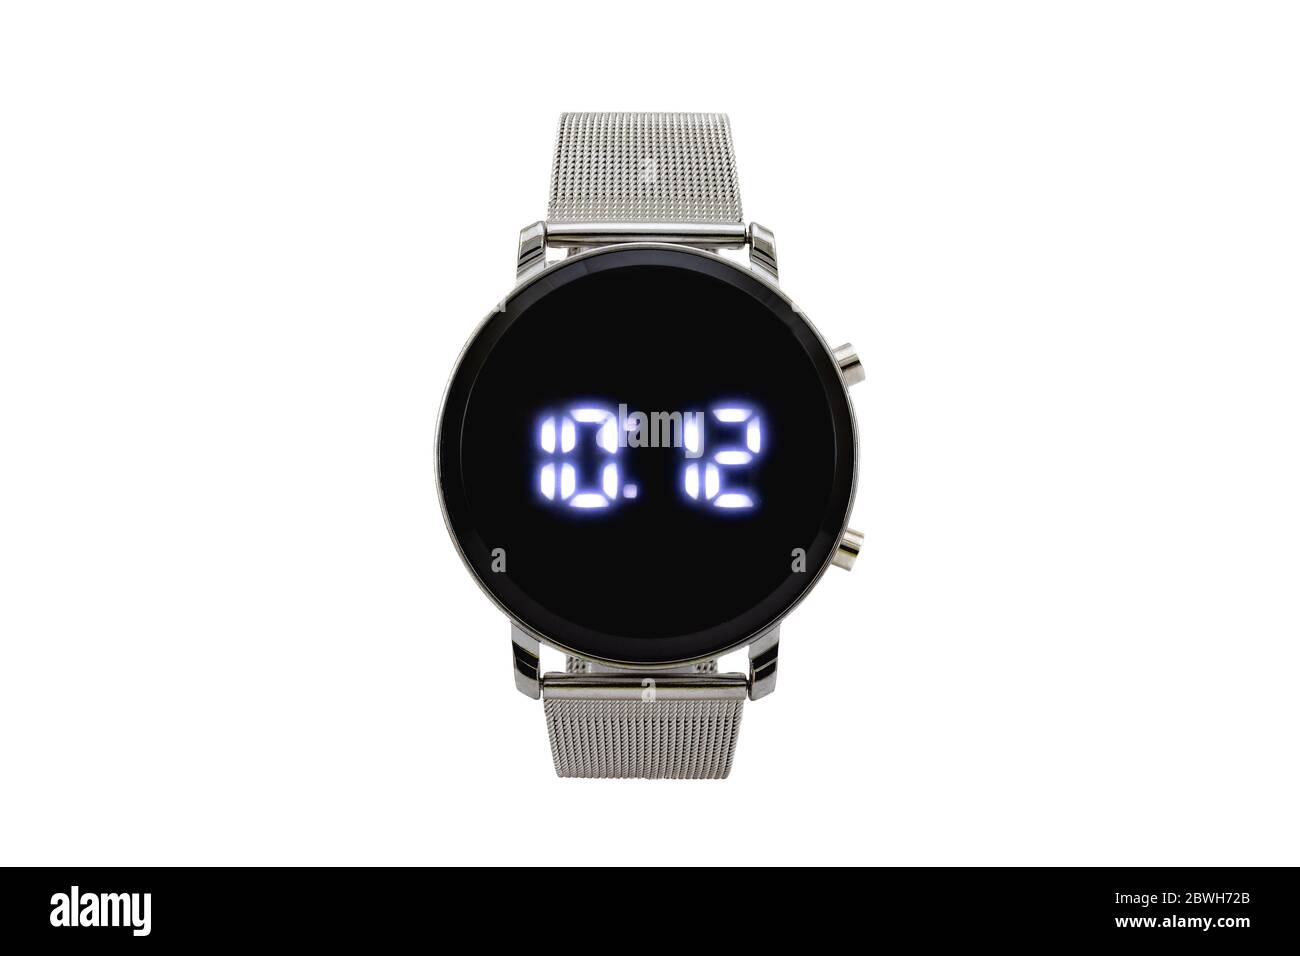 Round smartwatch with silver mesh style strap, black dial face and digital numerals, isolated on white background. Stock Photo